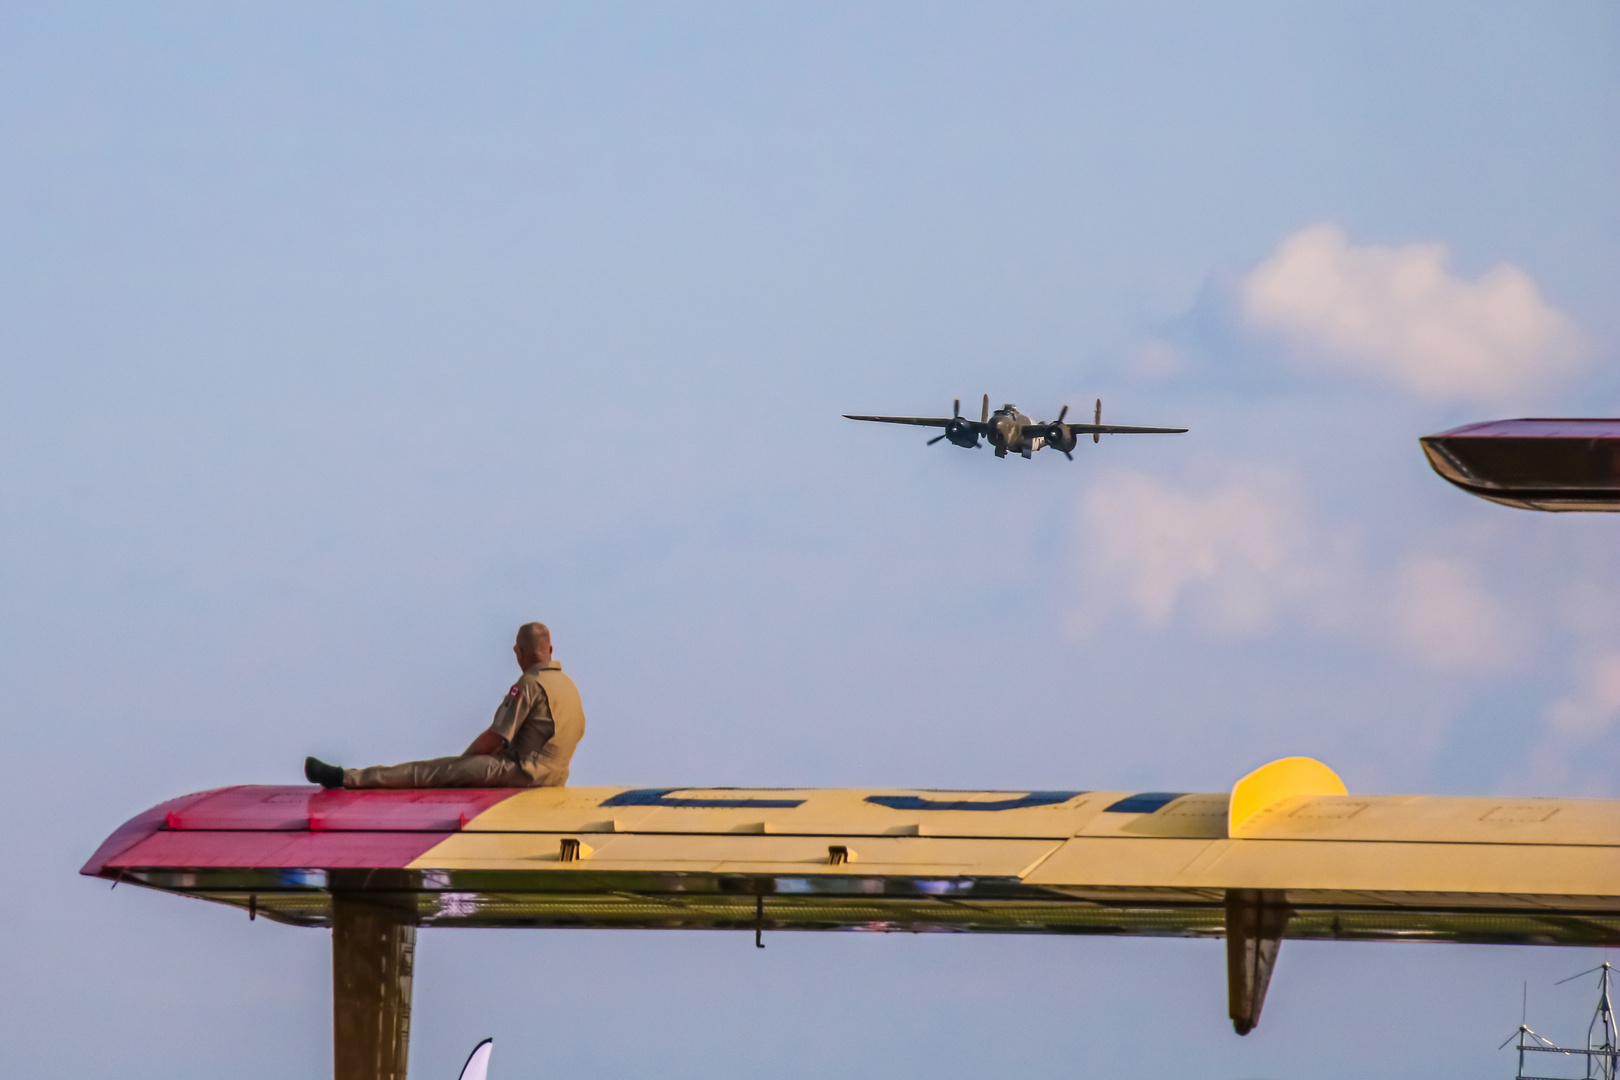 Appropriate Places to watch Airshows